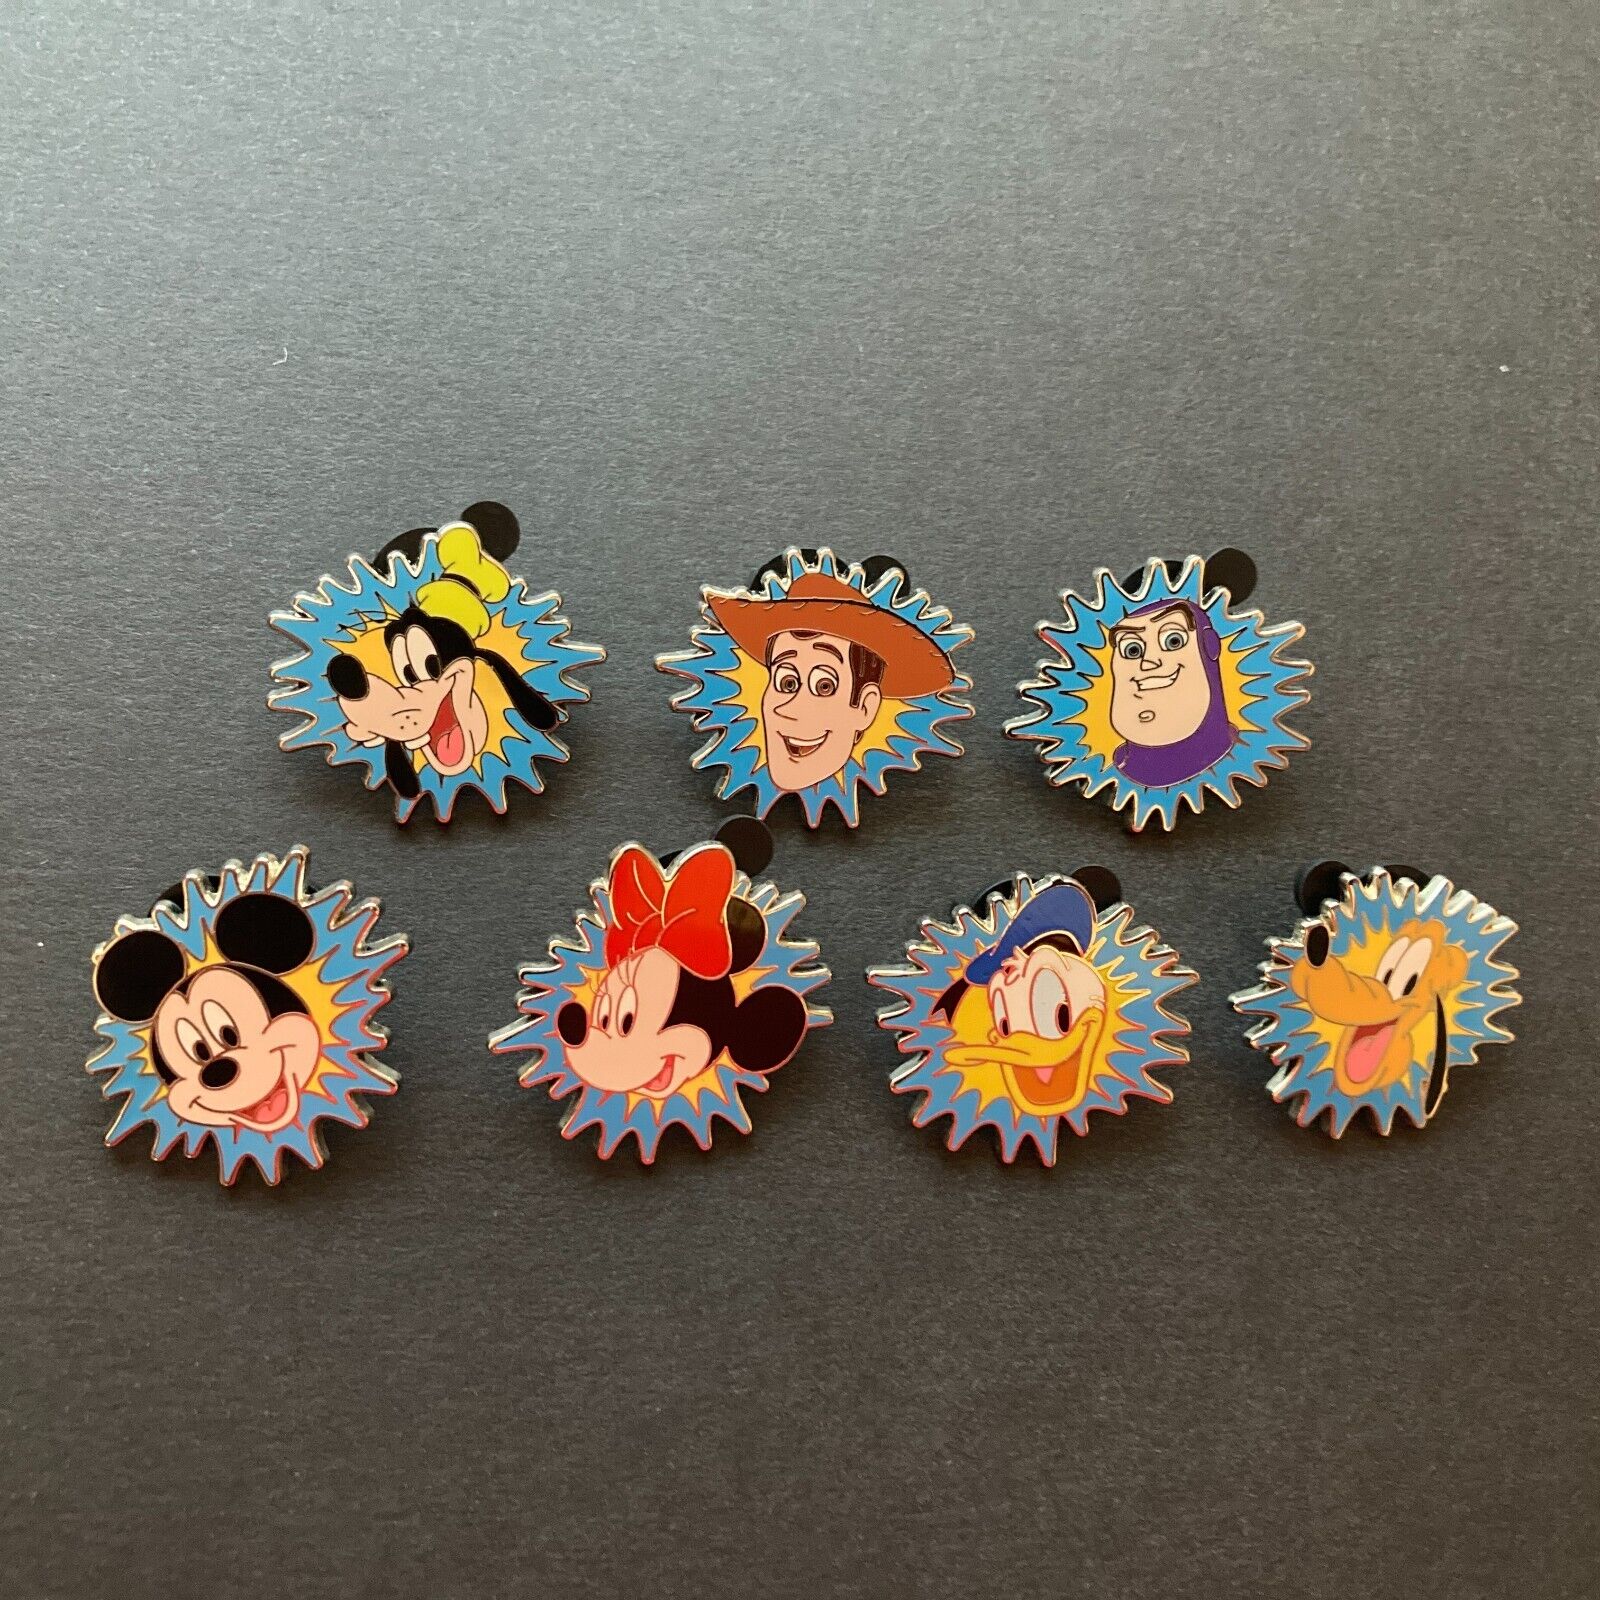 2010 Mini-Pin Collection - Complete Set of 7 Pins Disney Pin 74205